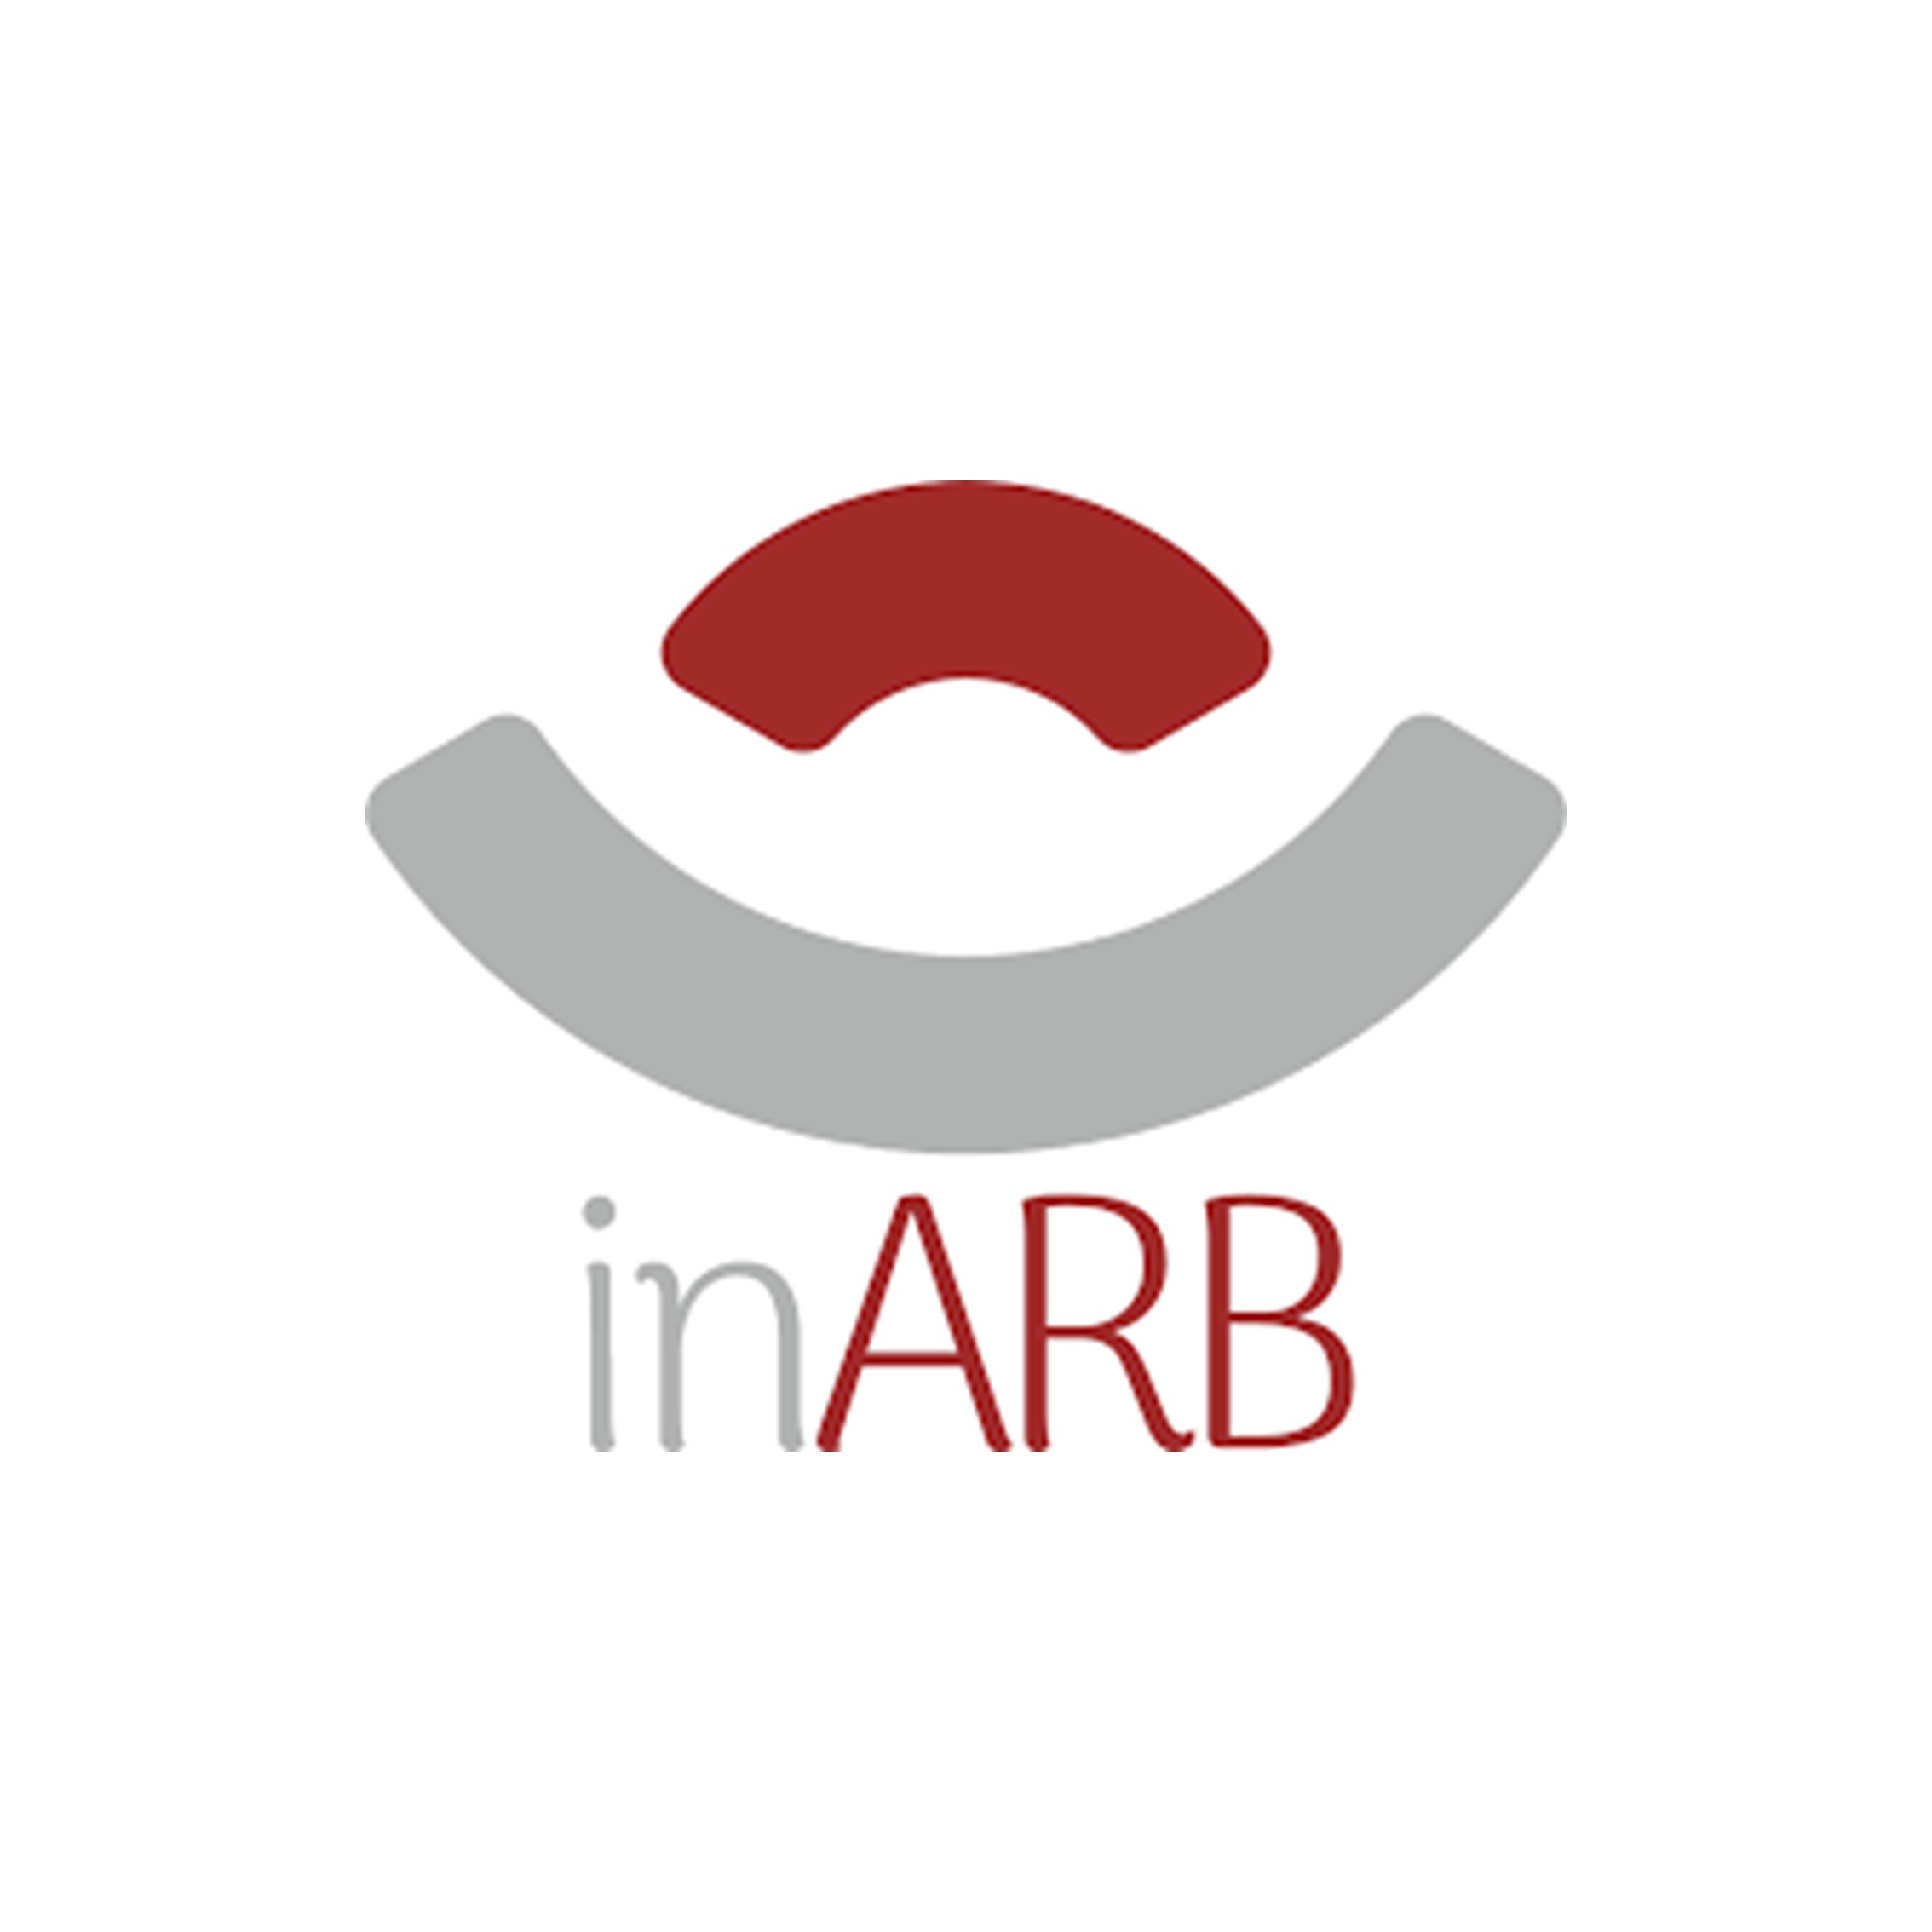 inARB